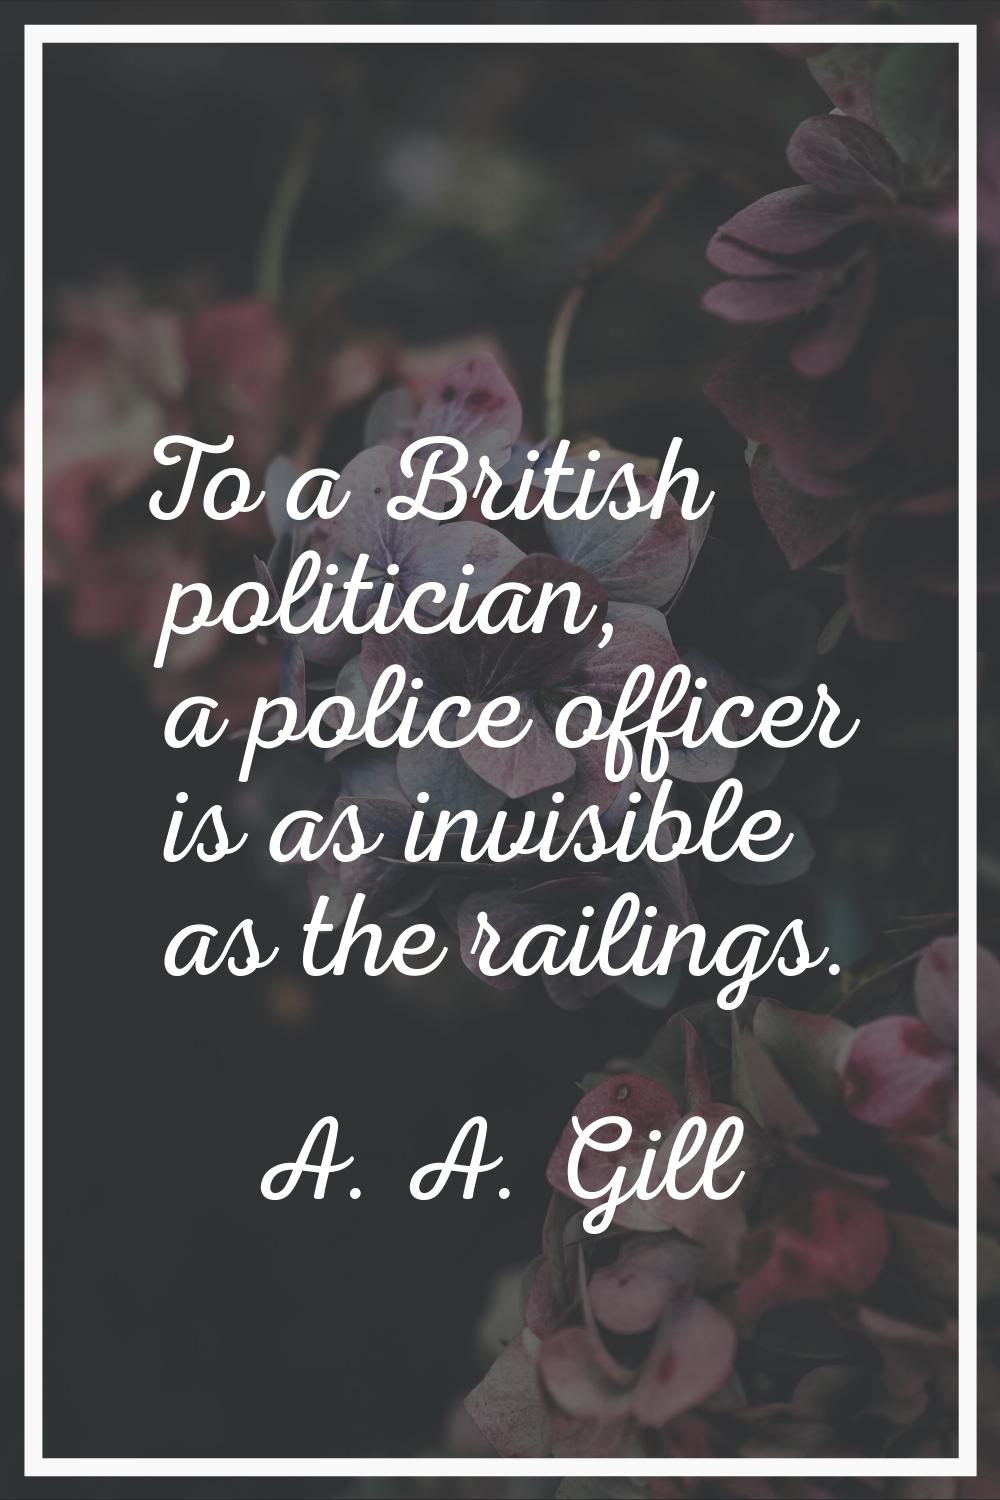 To a British politician, a police officer is as invisible as the railings.